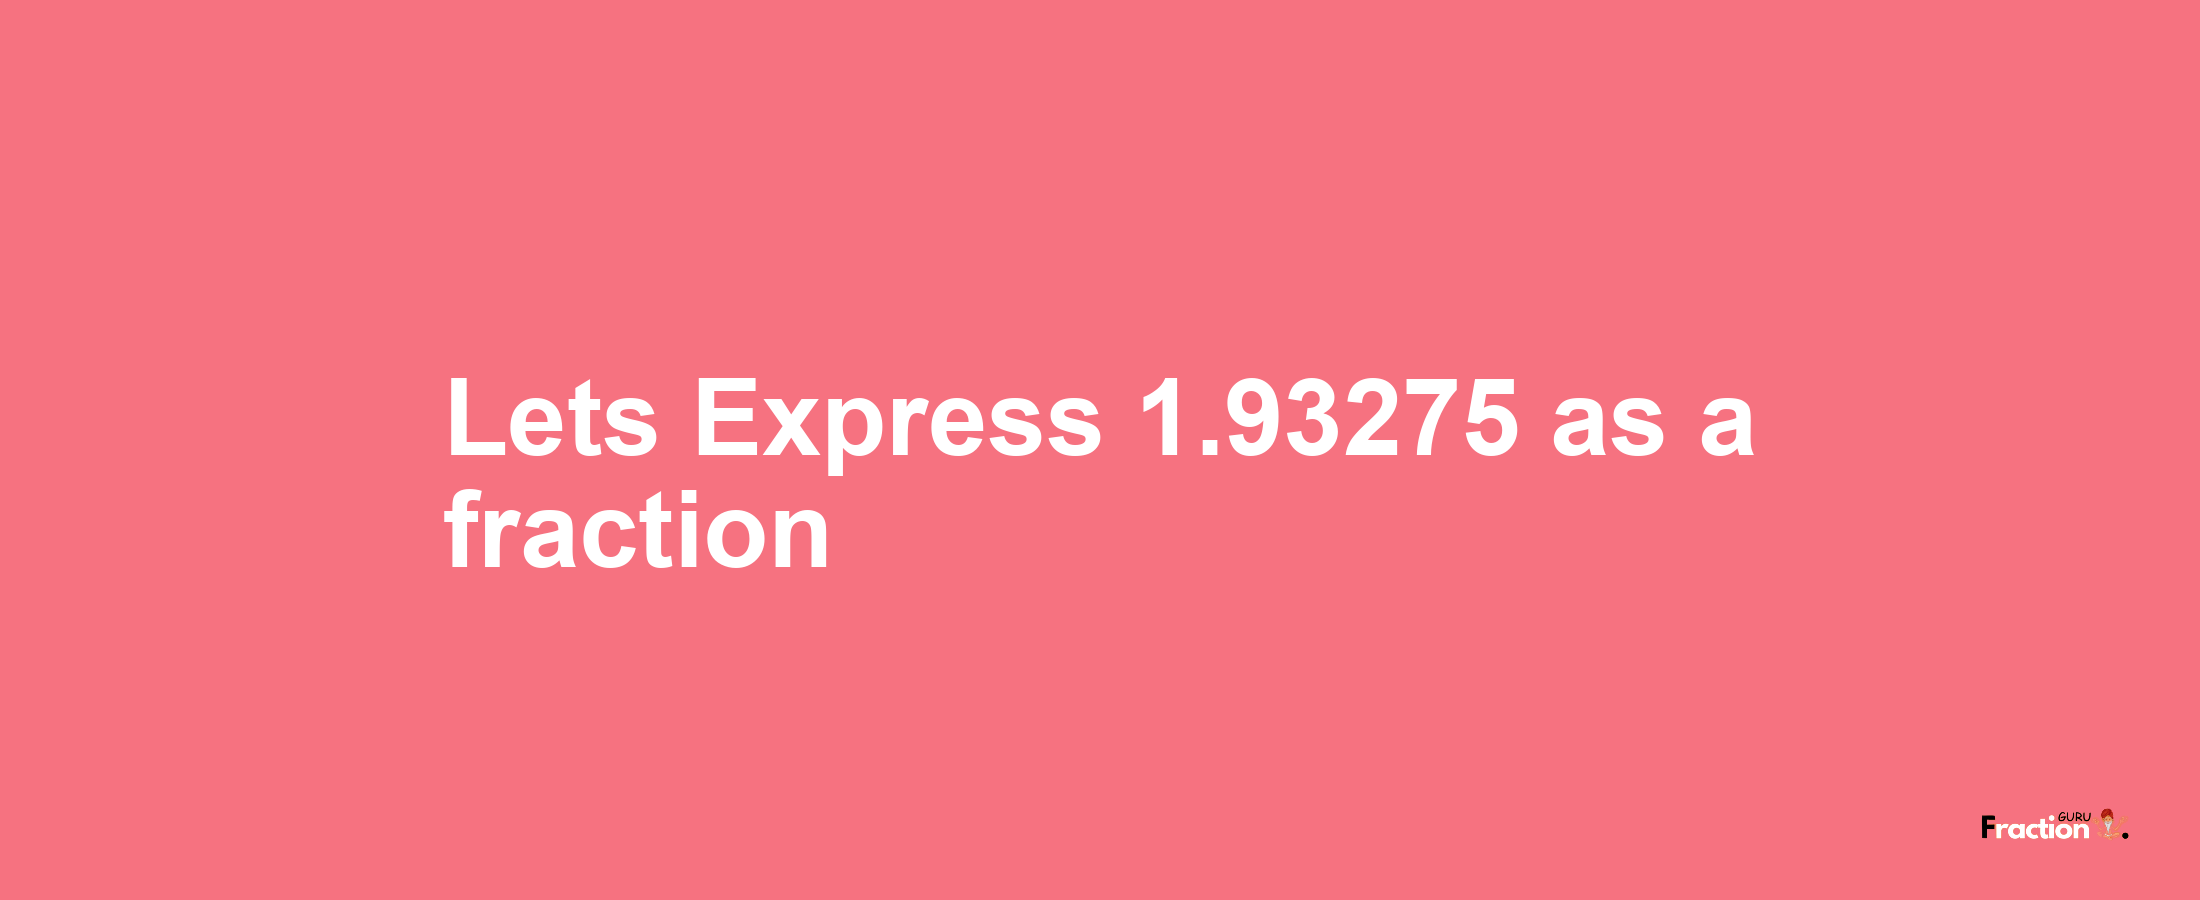 Lets Express 1.93275 as afraction